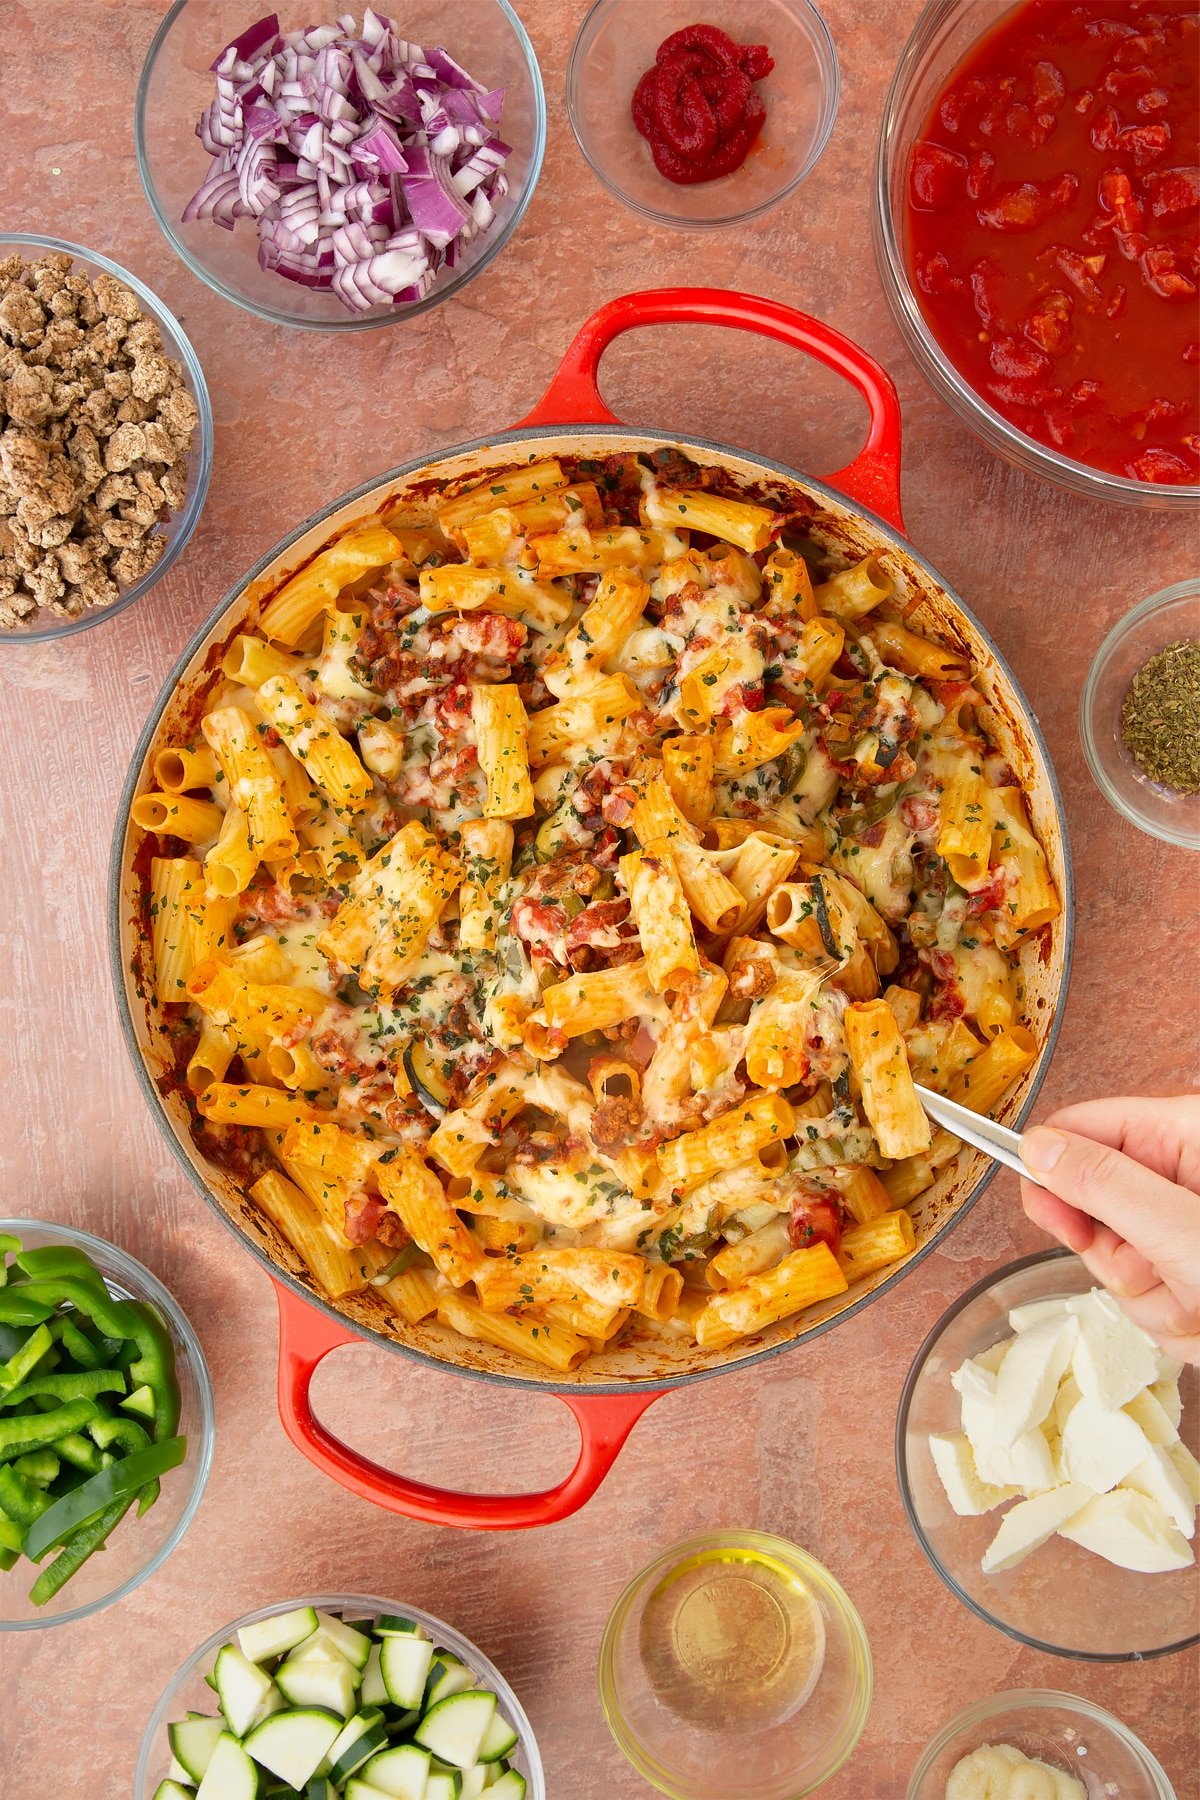 A casserole dish containing freshly baked bolognese al forno. Ingredients surround the dish. A hand holding a large spoon reaches in to serve.